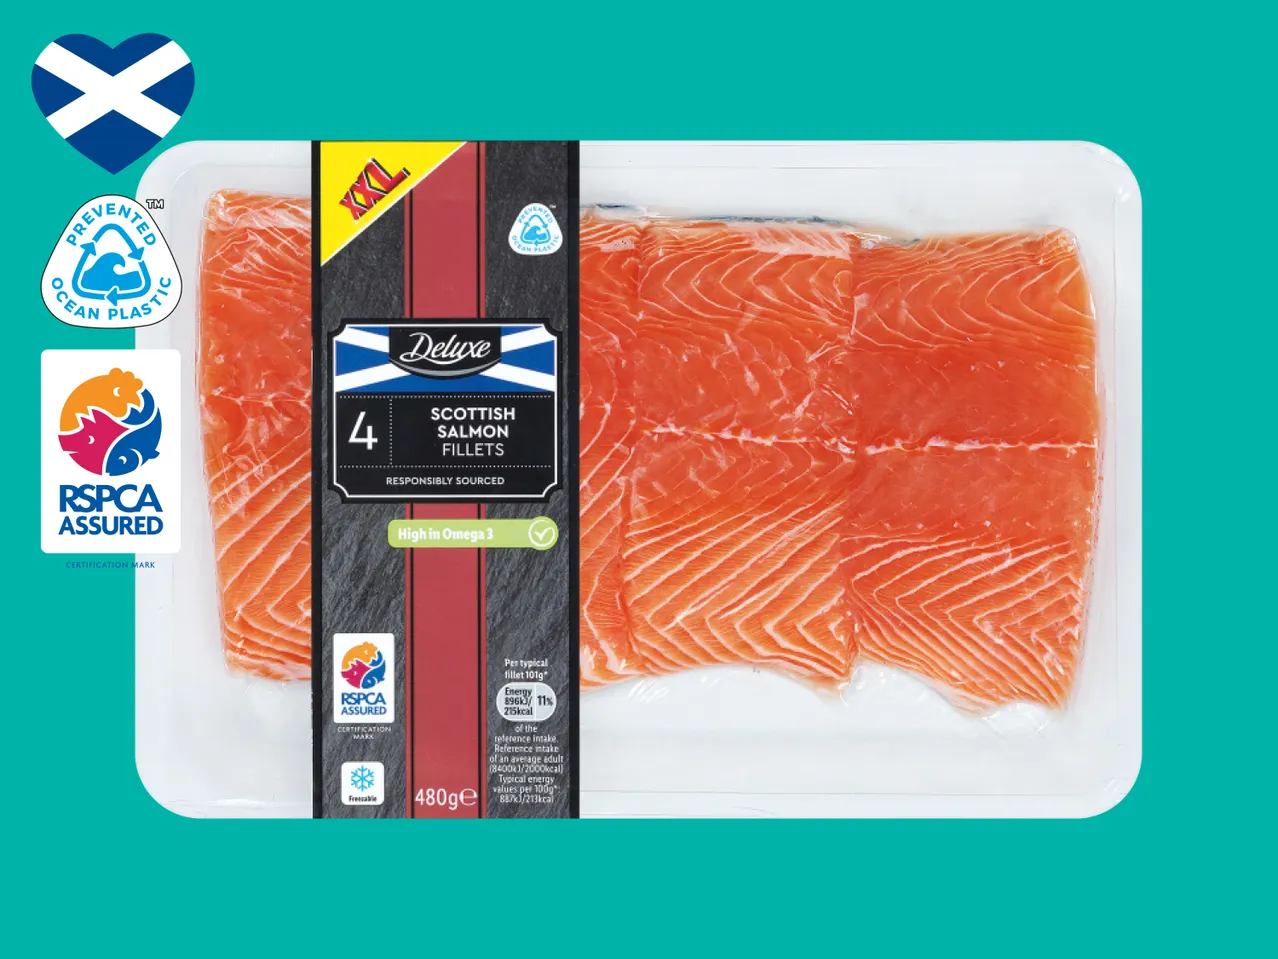 Go to full screen view: Deluxe 4 Scottish Salmon Fillets - Image 1